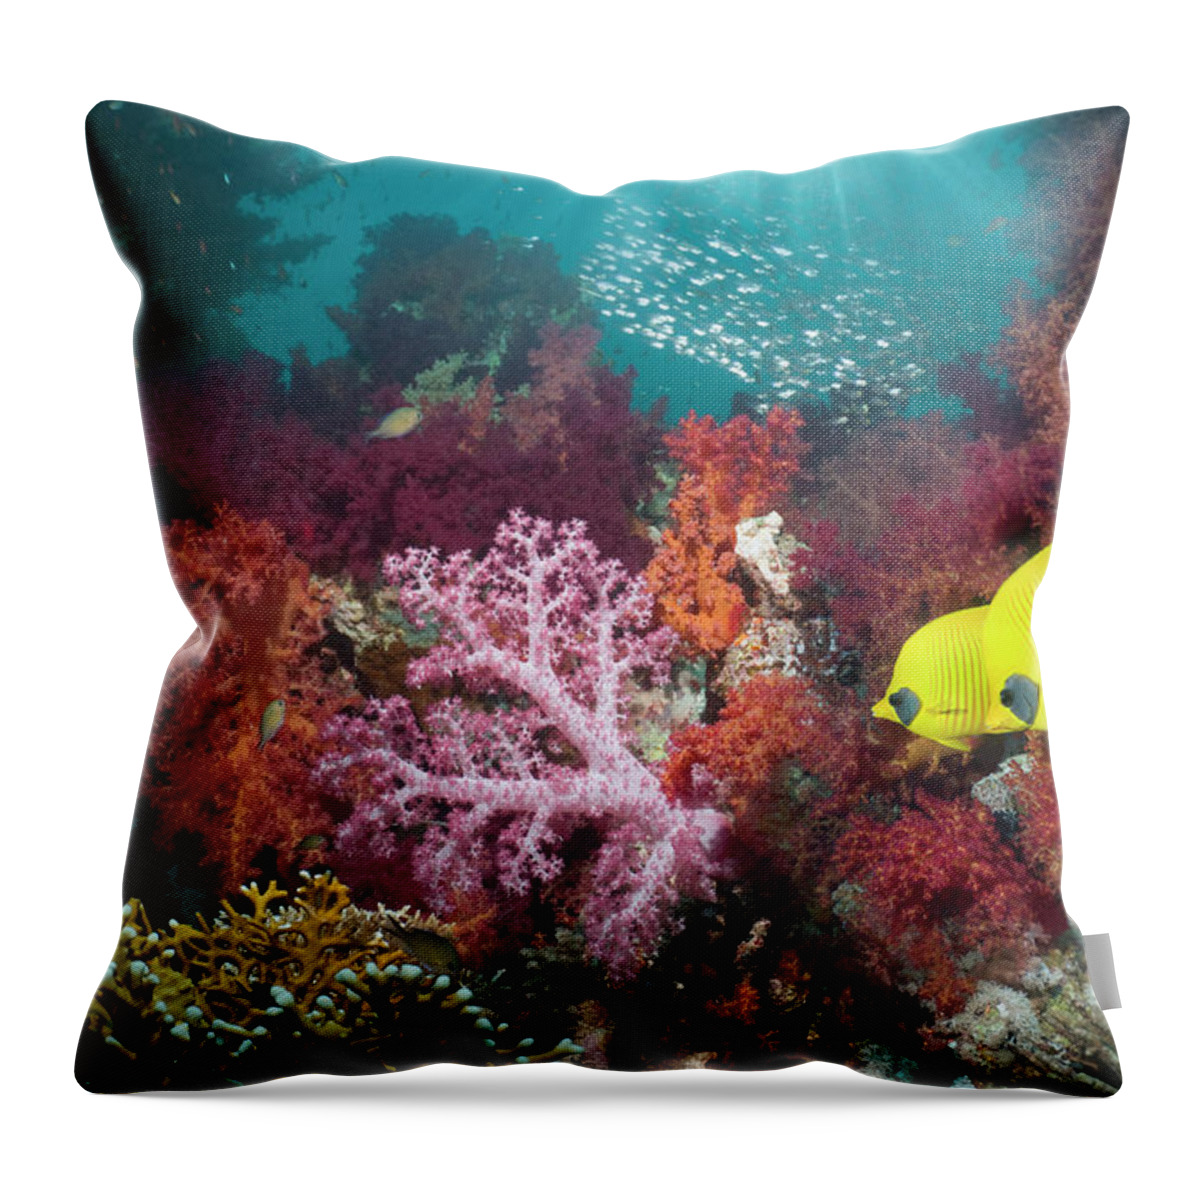 Tranquility Throw Pillow featuring the photograph Coral Reef Scenery #51 by Georgette Douwma